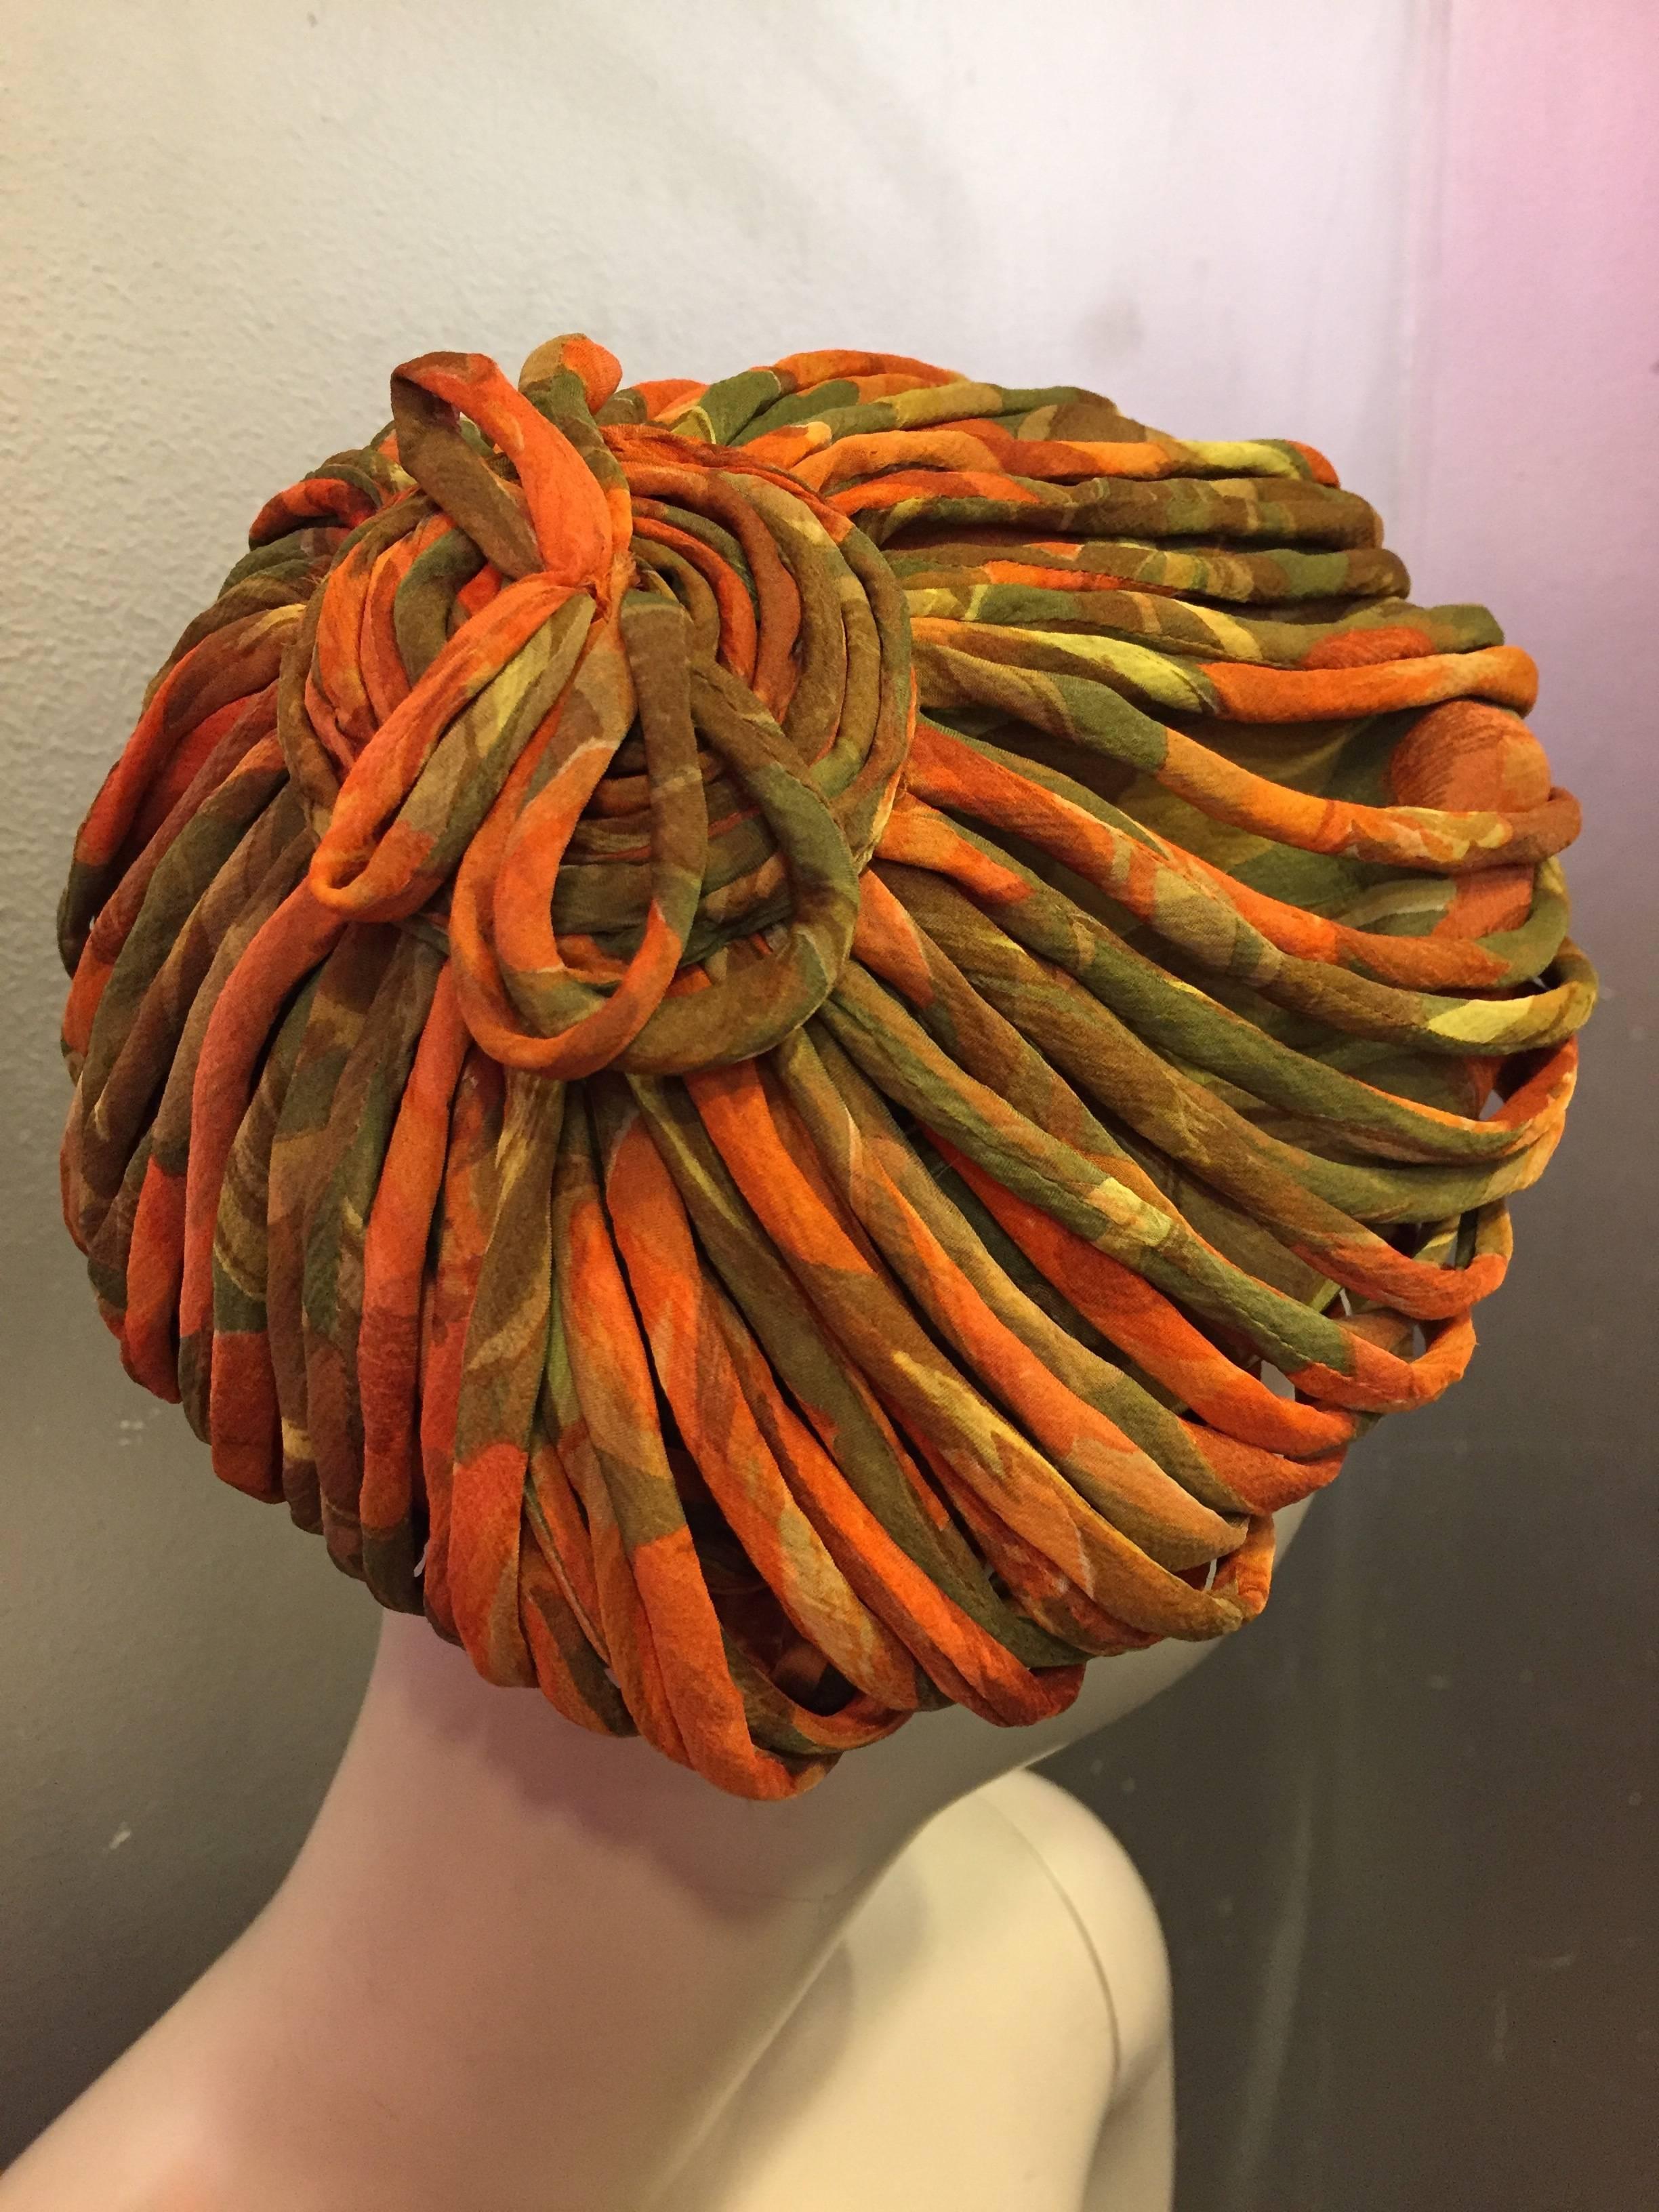 1950s James Galanos autumnal silk chiffon beret-style hat or tam constructed of bias cording with a top spiral knot. Chiffon lined with grosgrain band for structure.